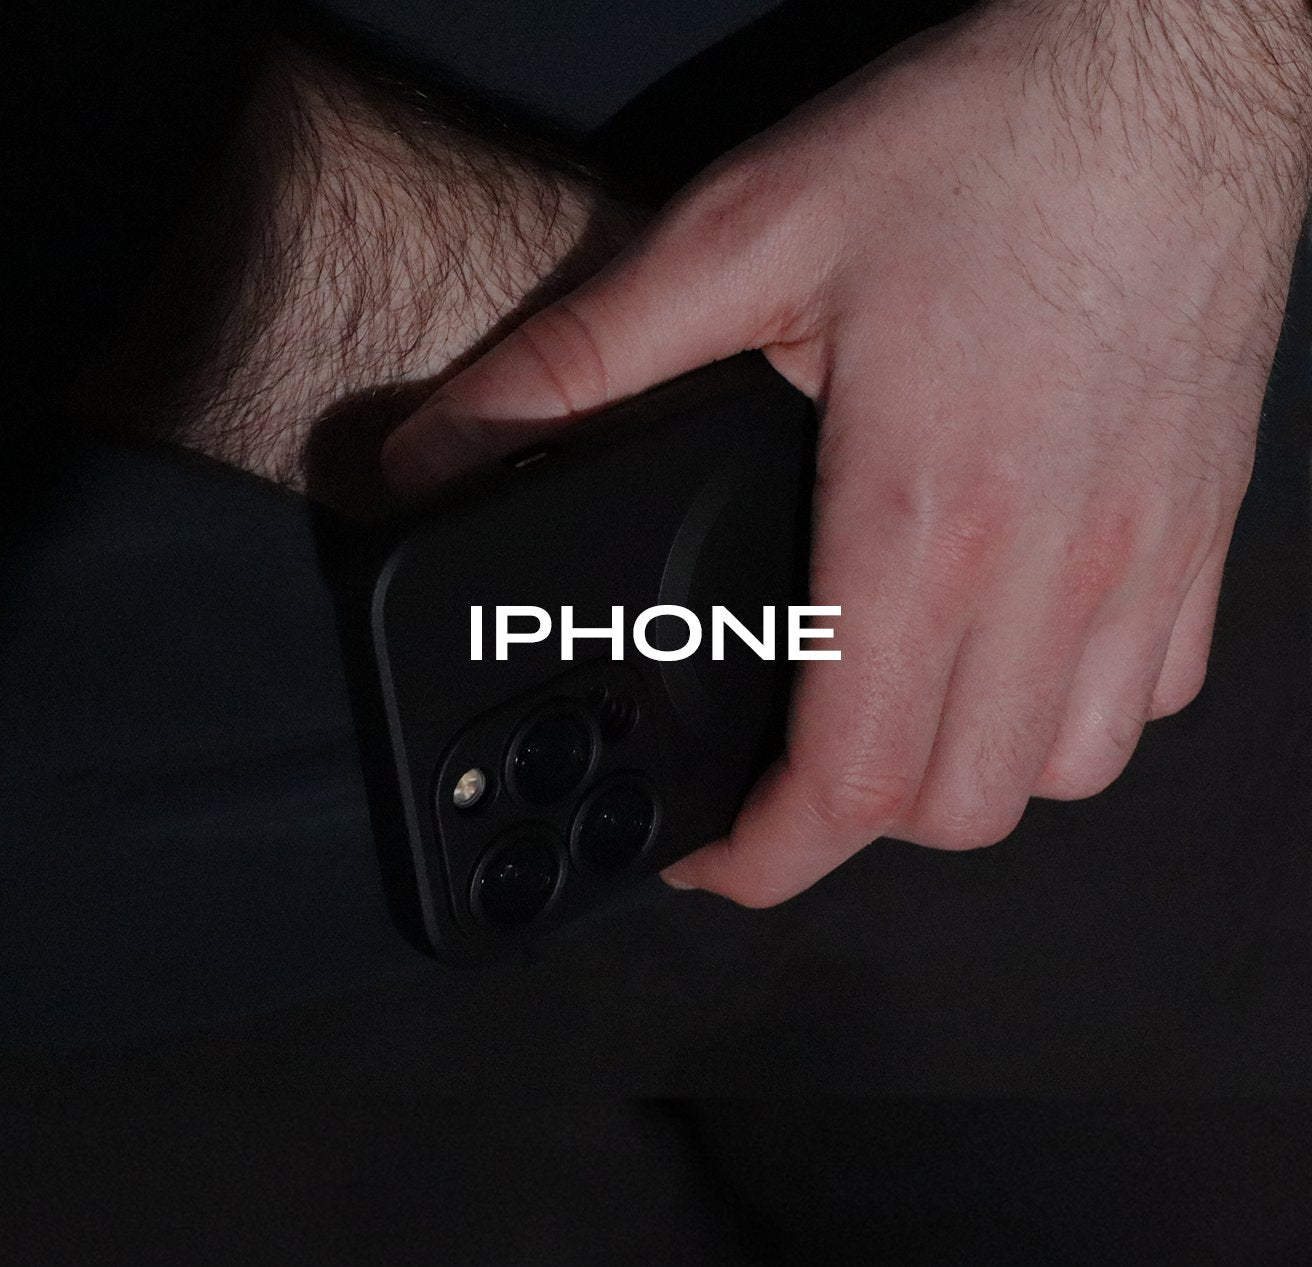 Accessories for iPhone